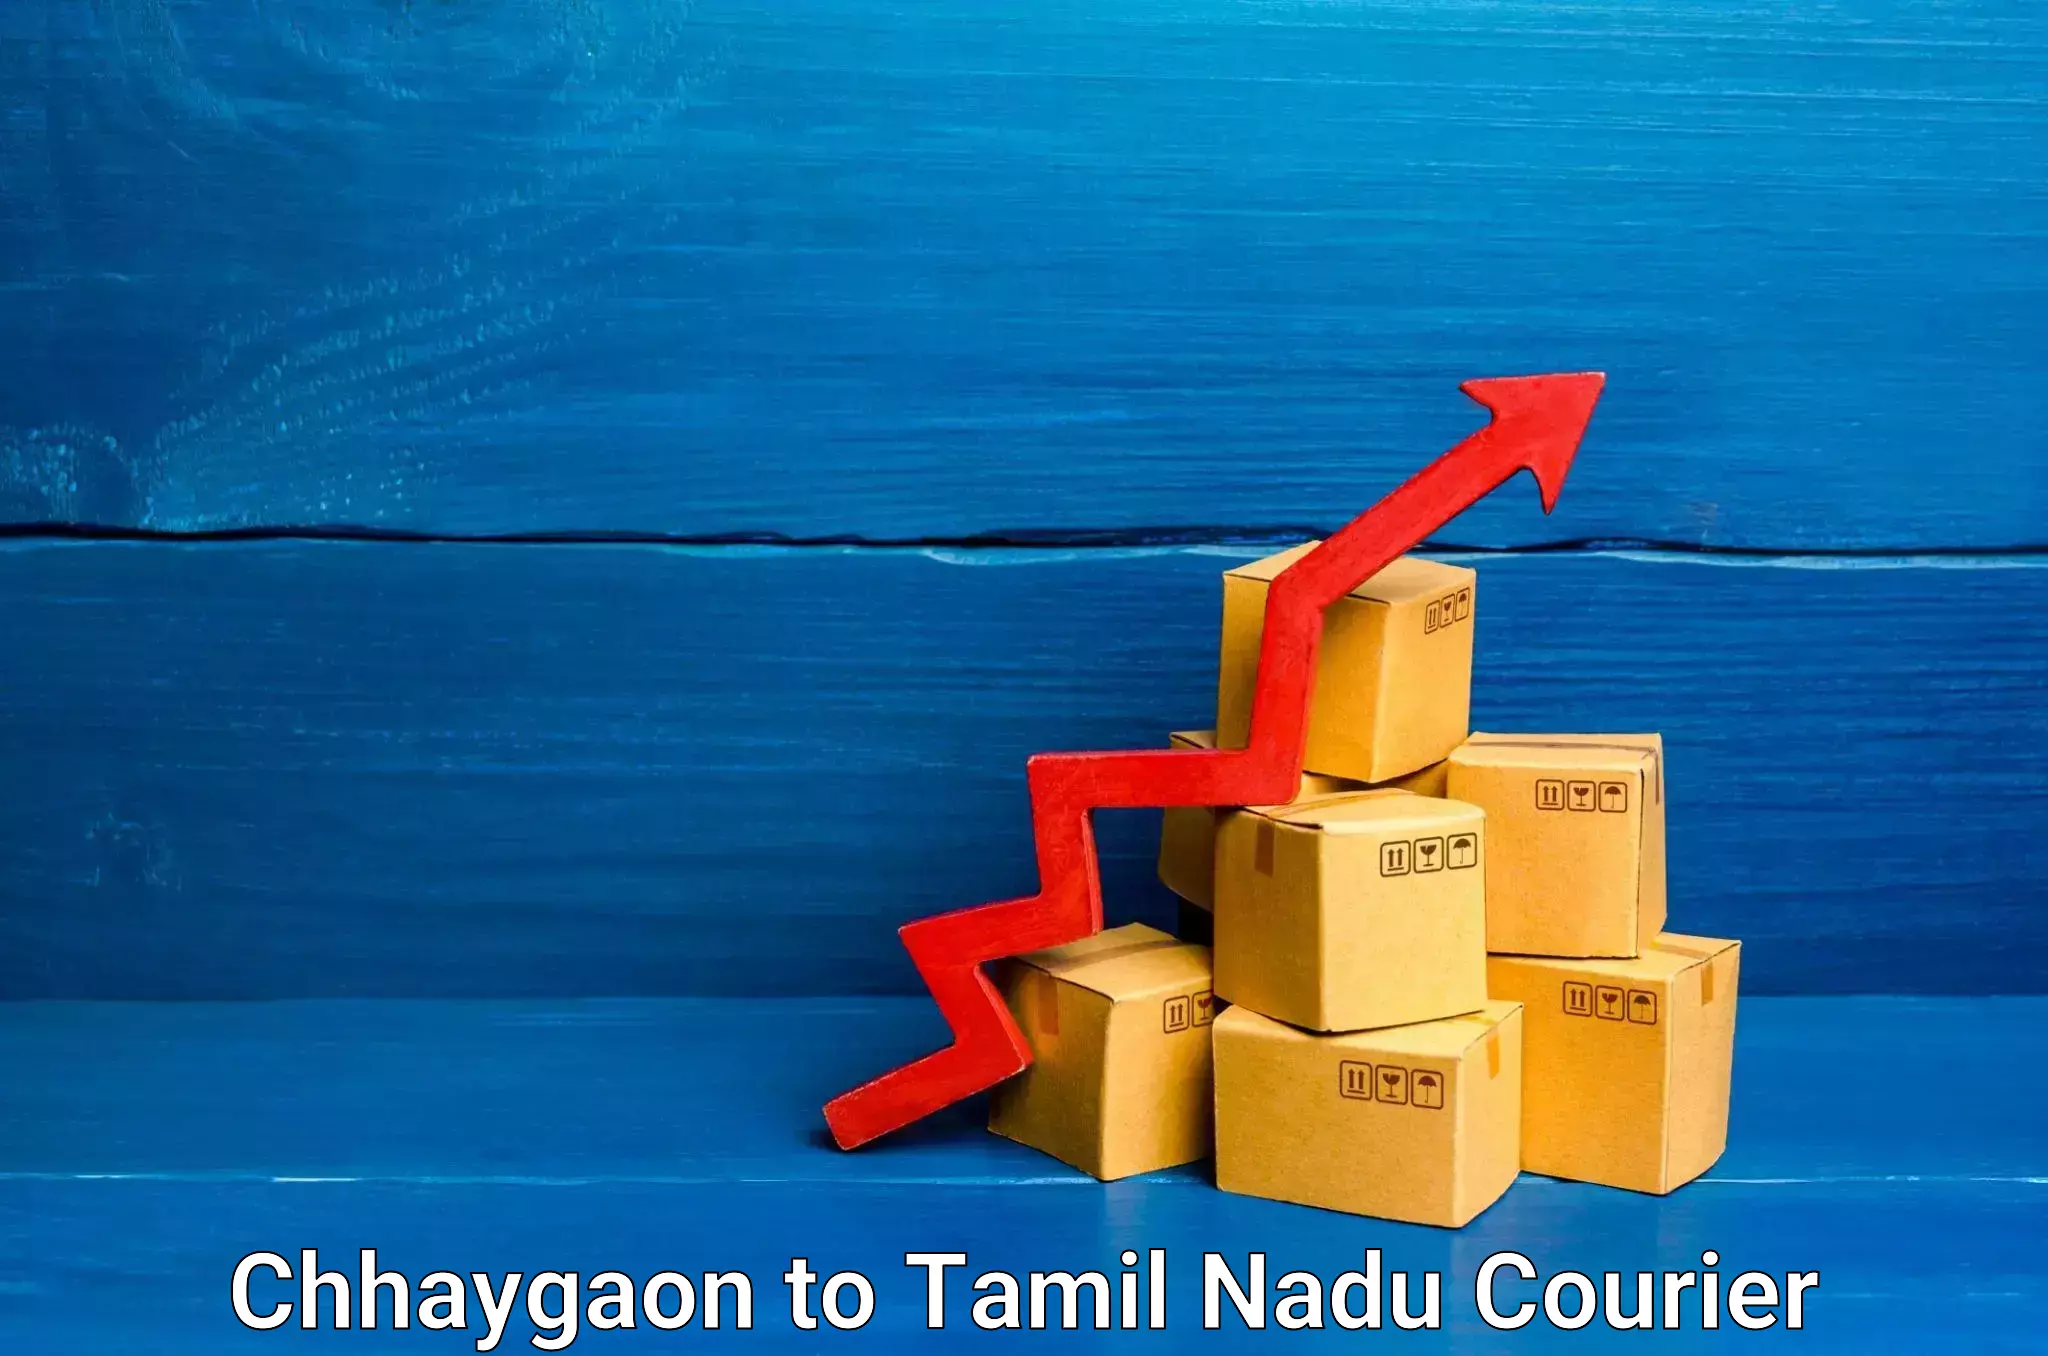 Express mail solutions Chhaygaon to Udumalpet